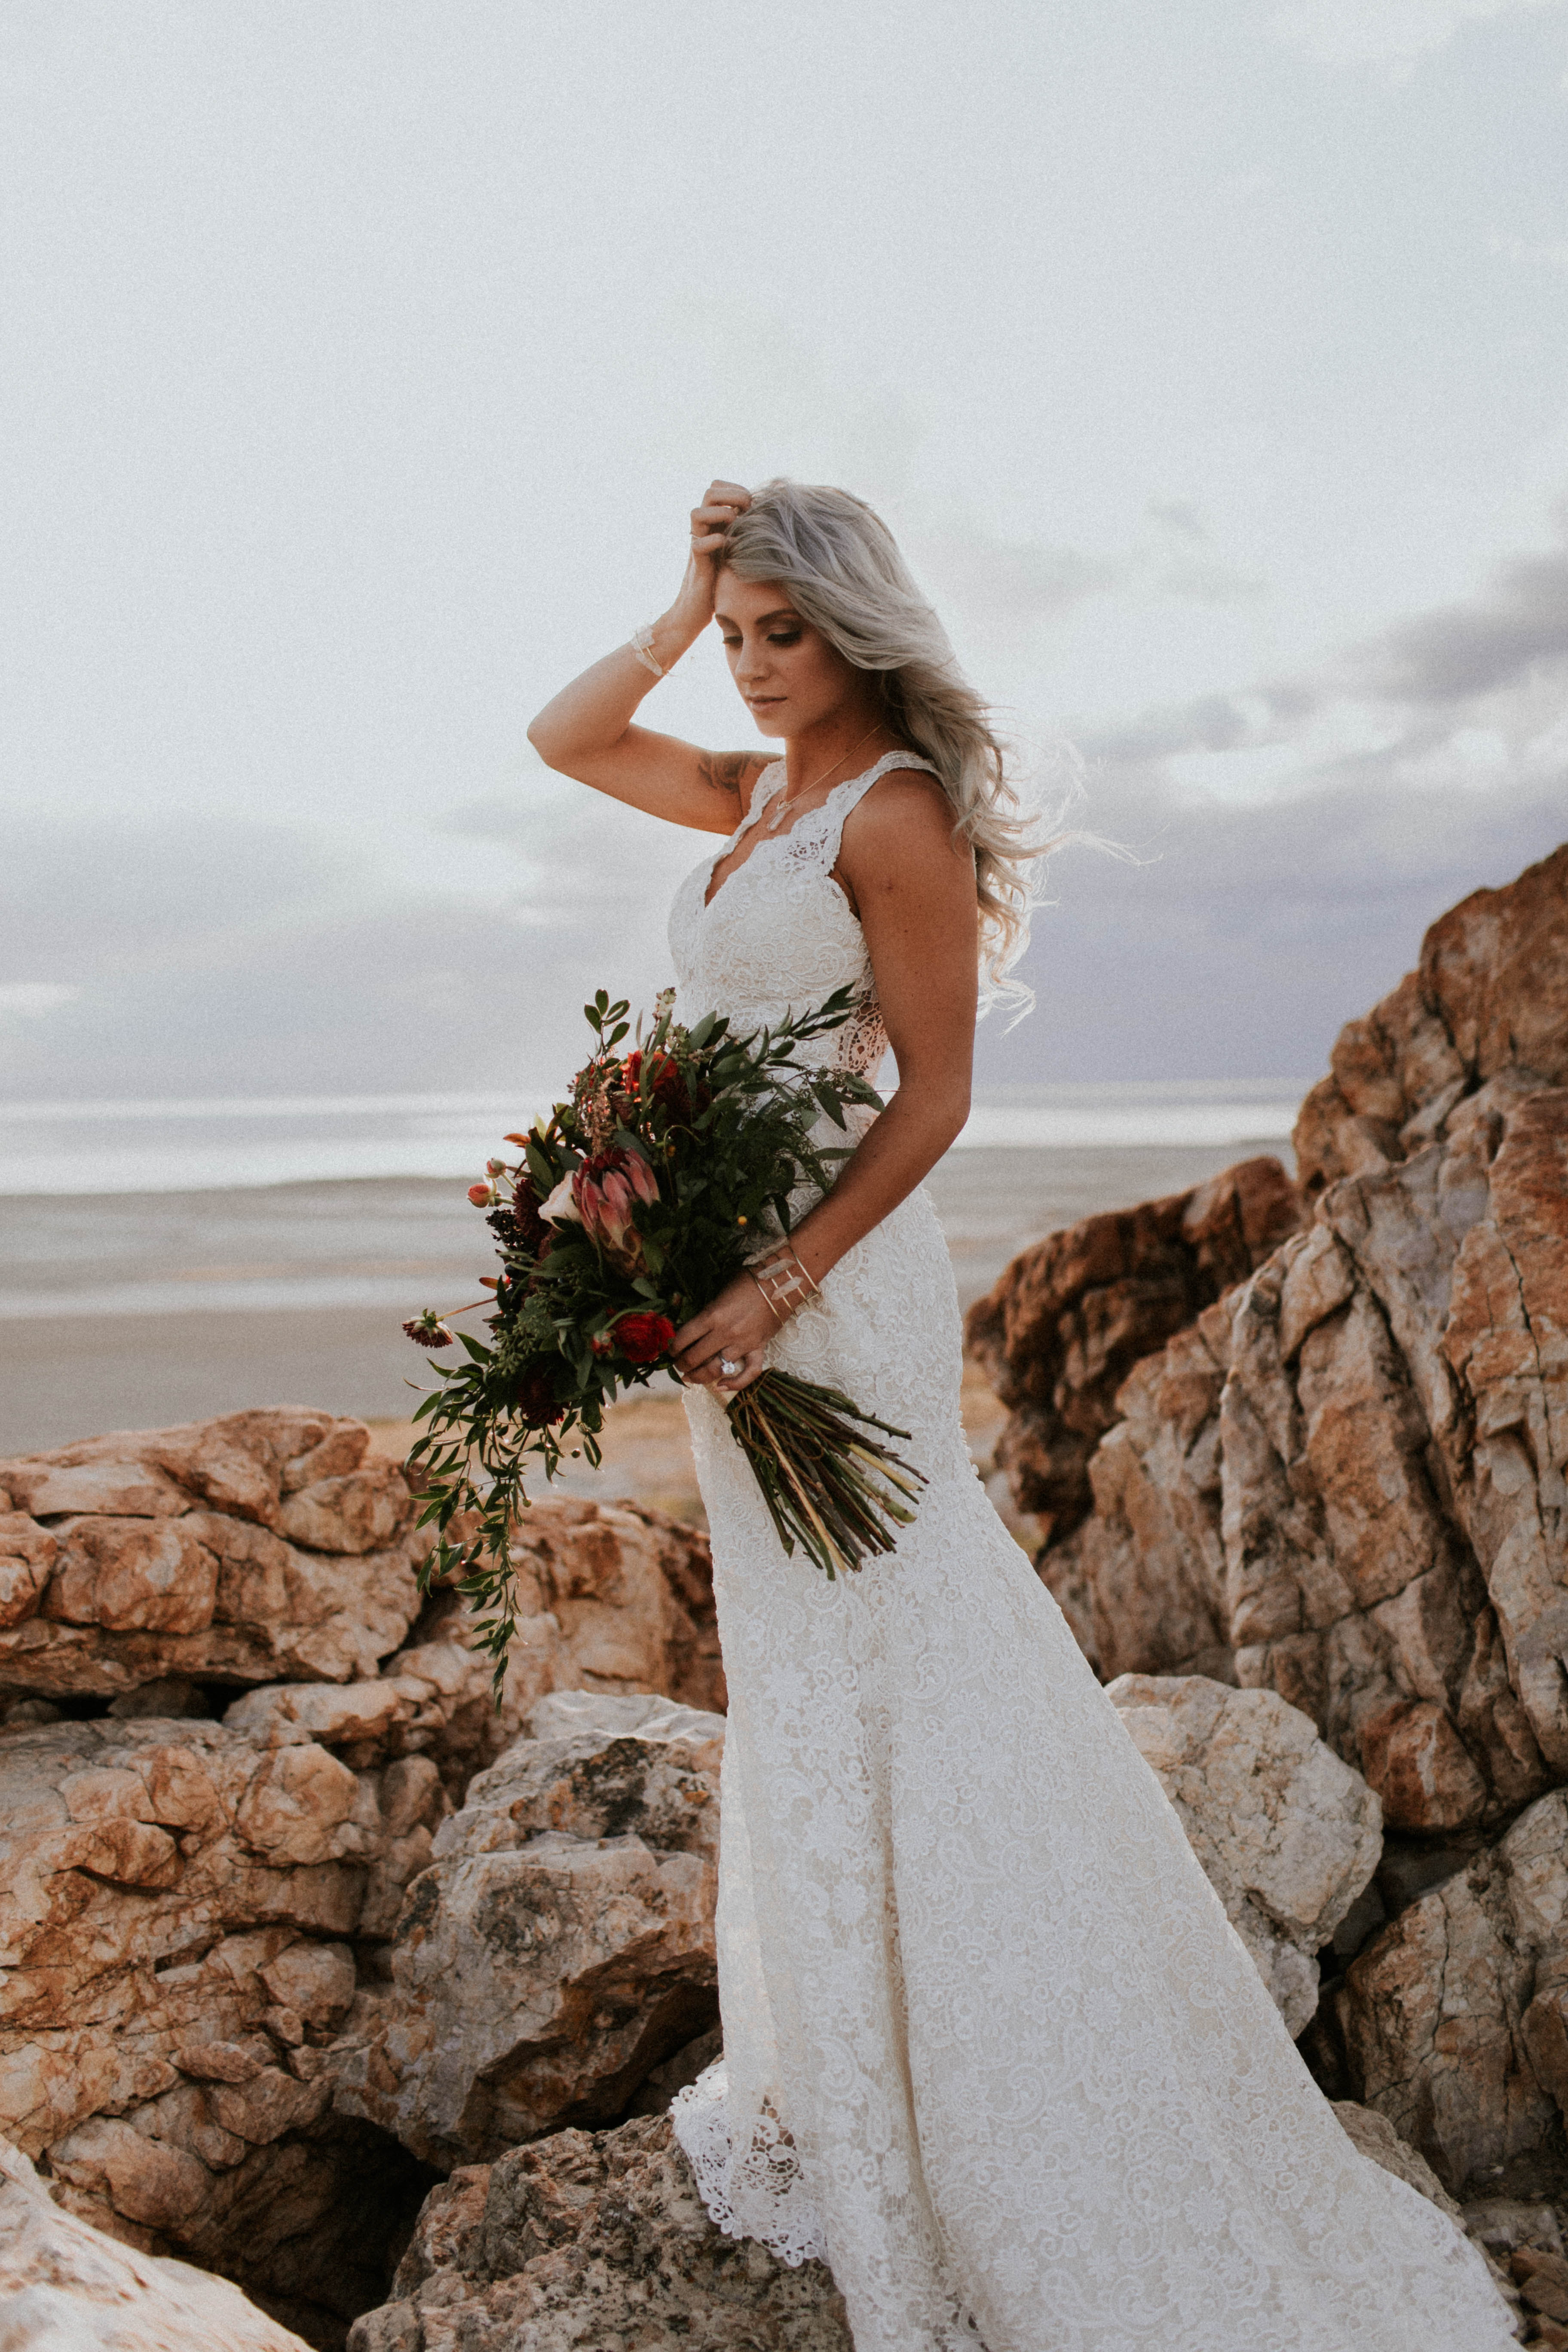 Romantic Lace Wedding Dress in Boho-Chic Styled Shoot